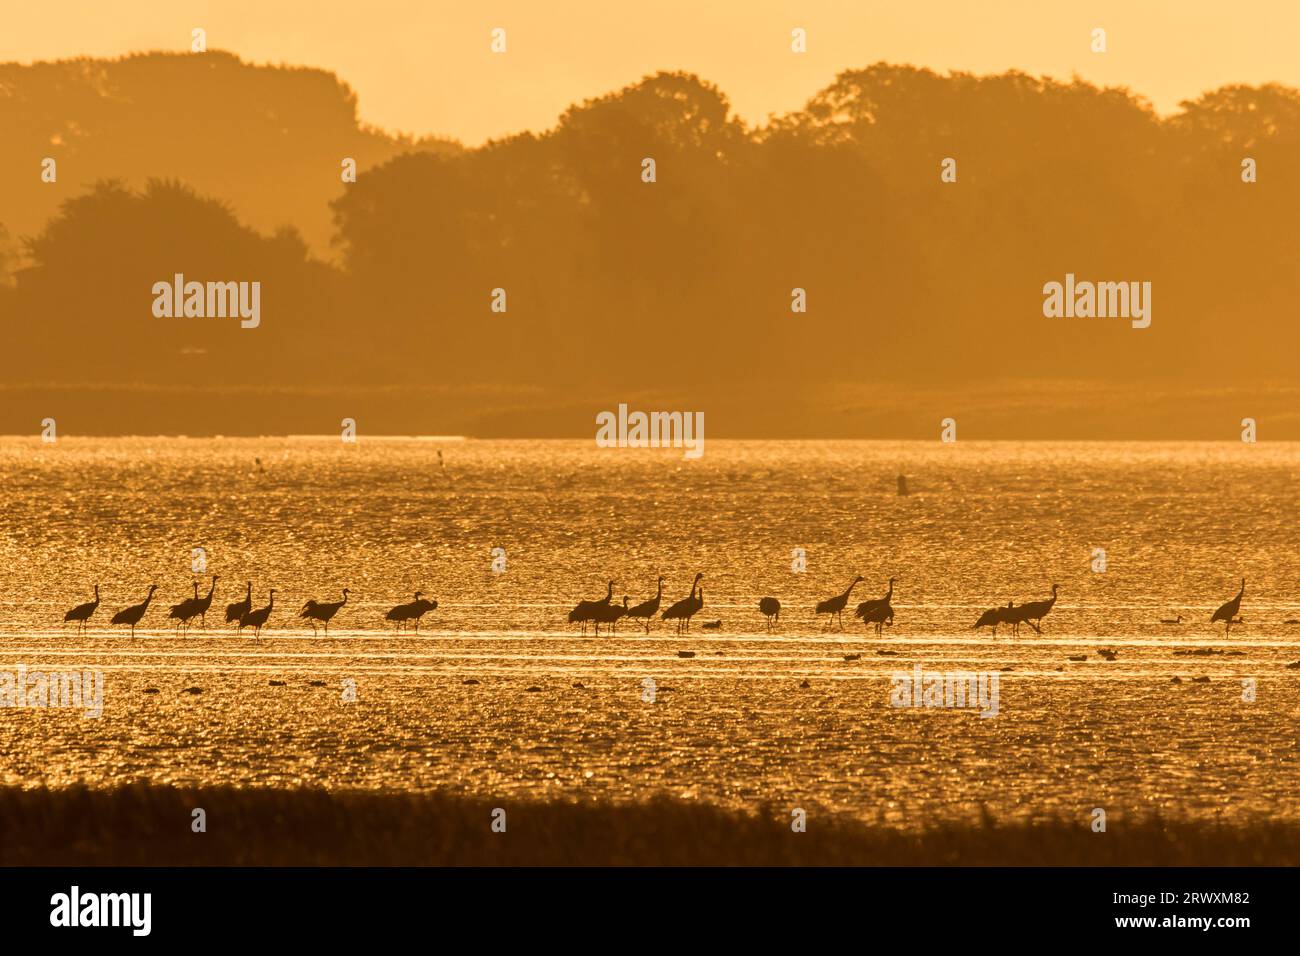 Flock of common cranes / Eurasian crane (Grus grus) group resting in shallow water in autumn / fall, Western Pomerania Lagoon Area NP, Germany Stock Photo